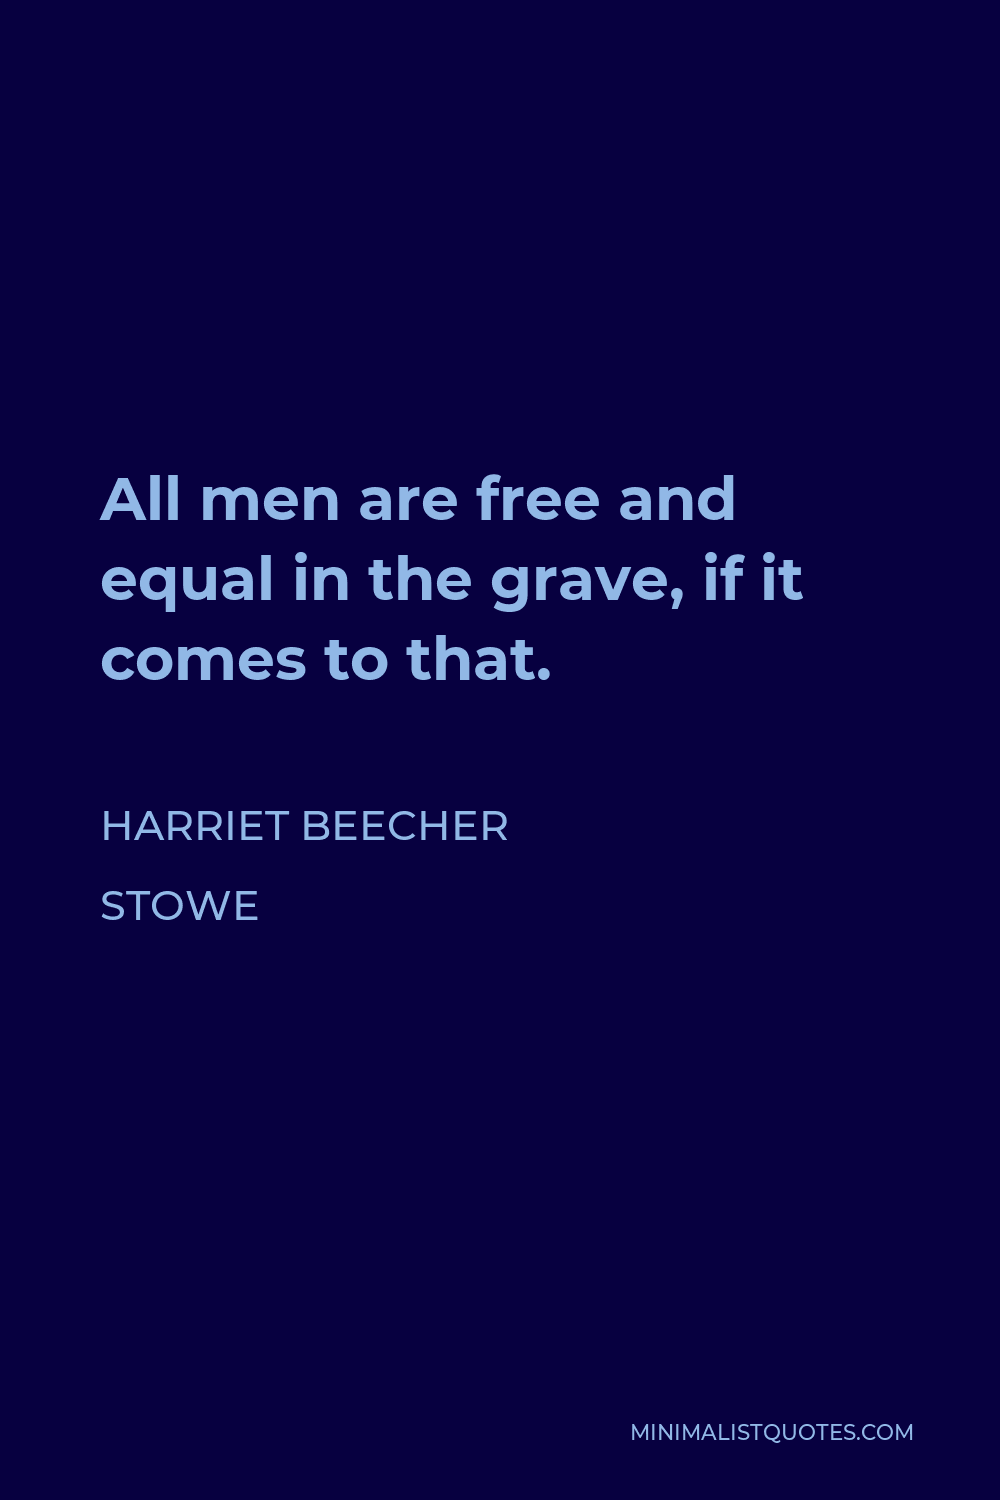 Harriet Beecher Stowe Quote - All men are free and equal in the grave, if it comes to that.